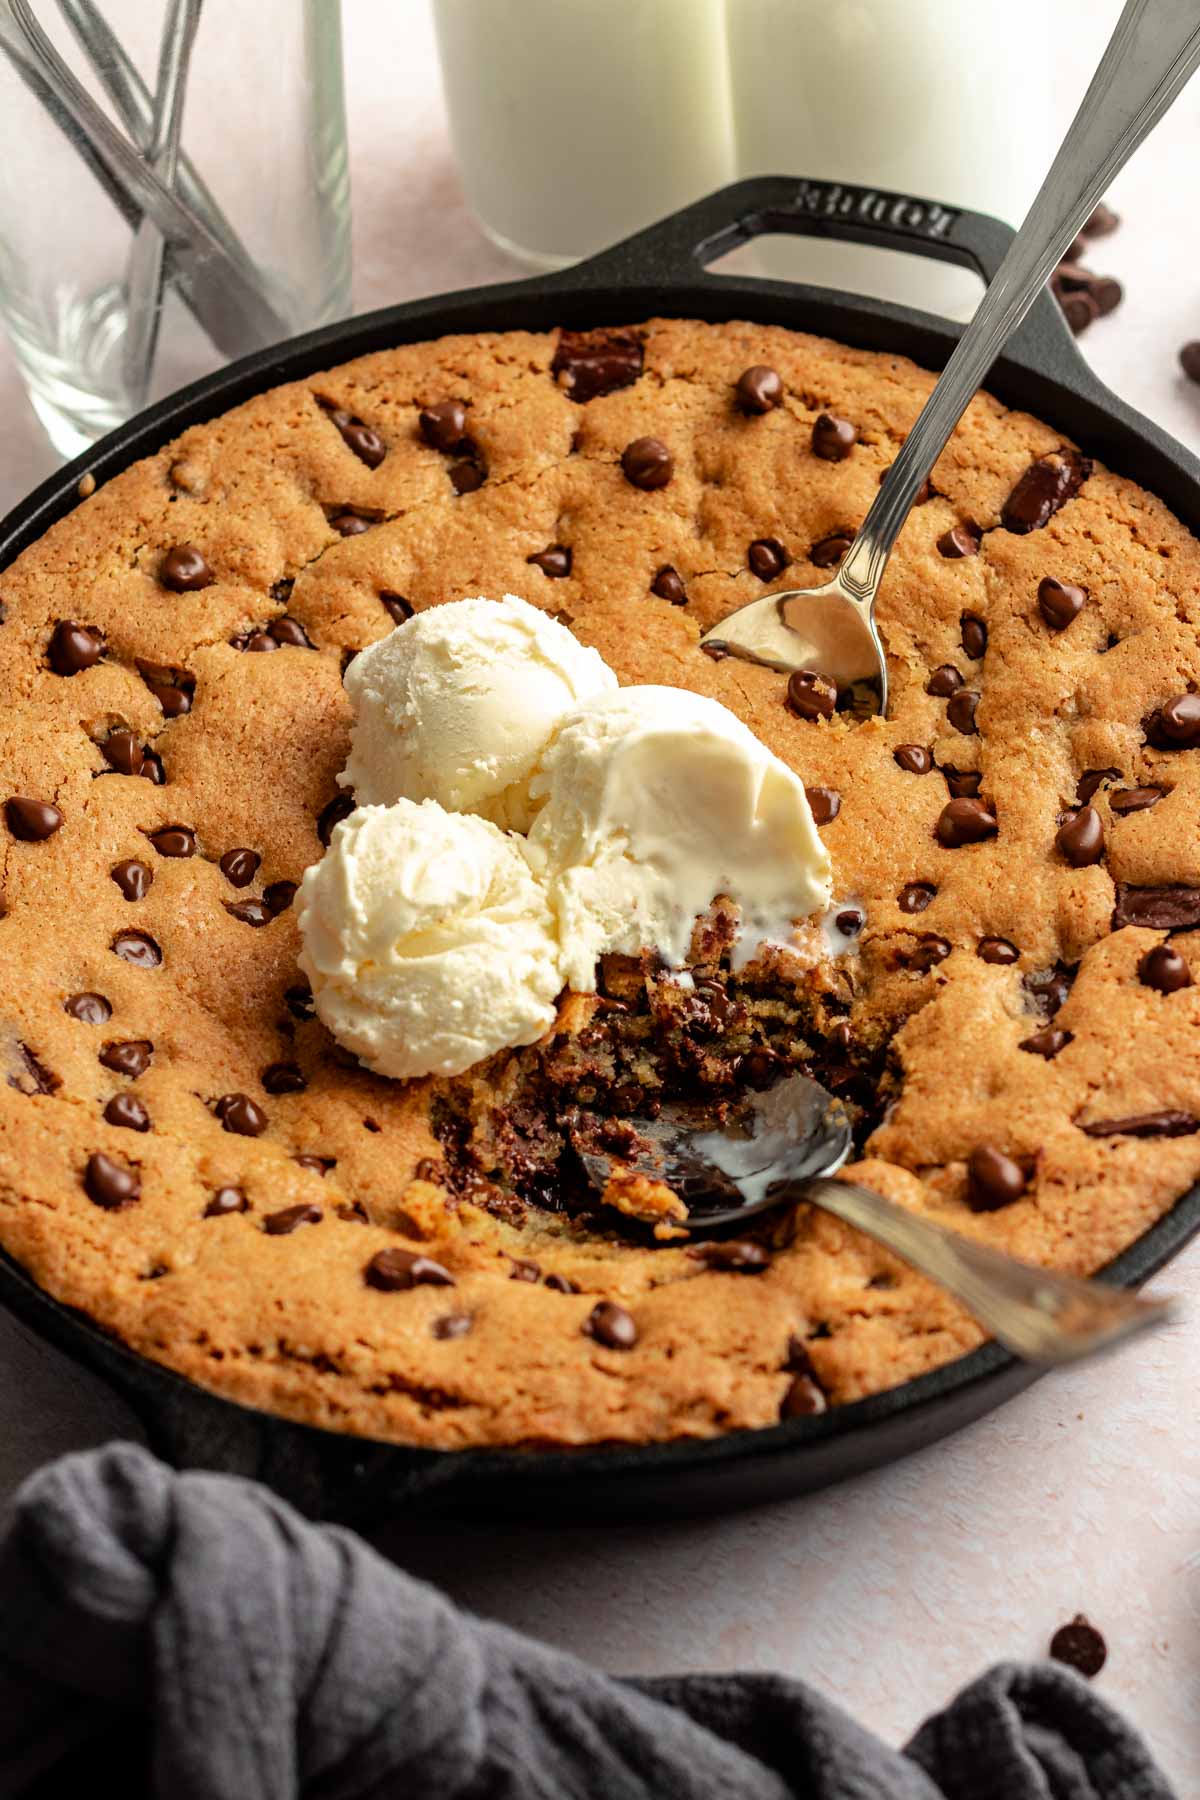 Two spoons scooping up skillet cookie.